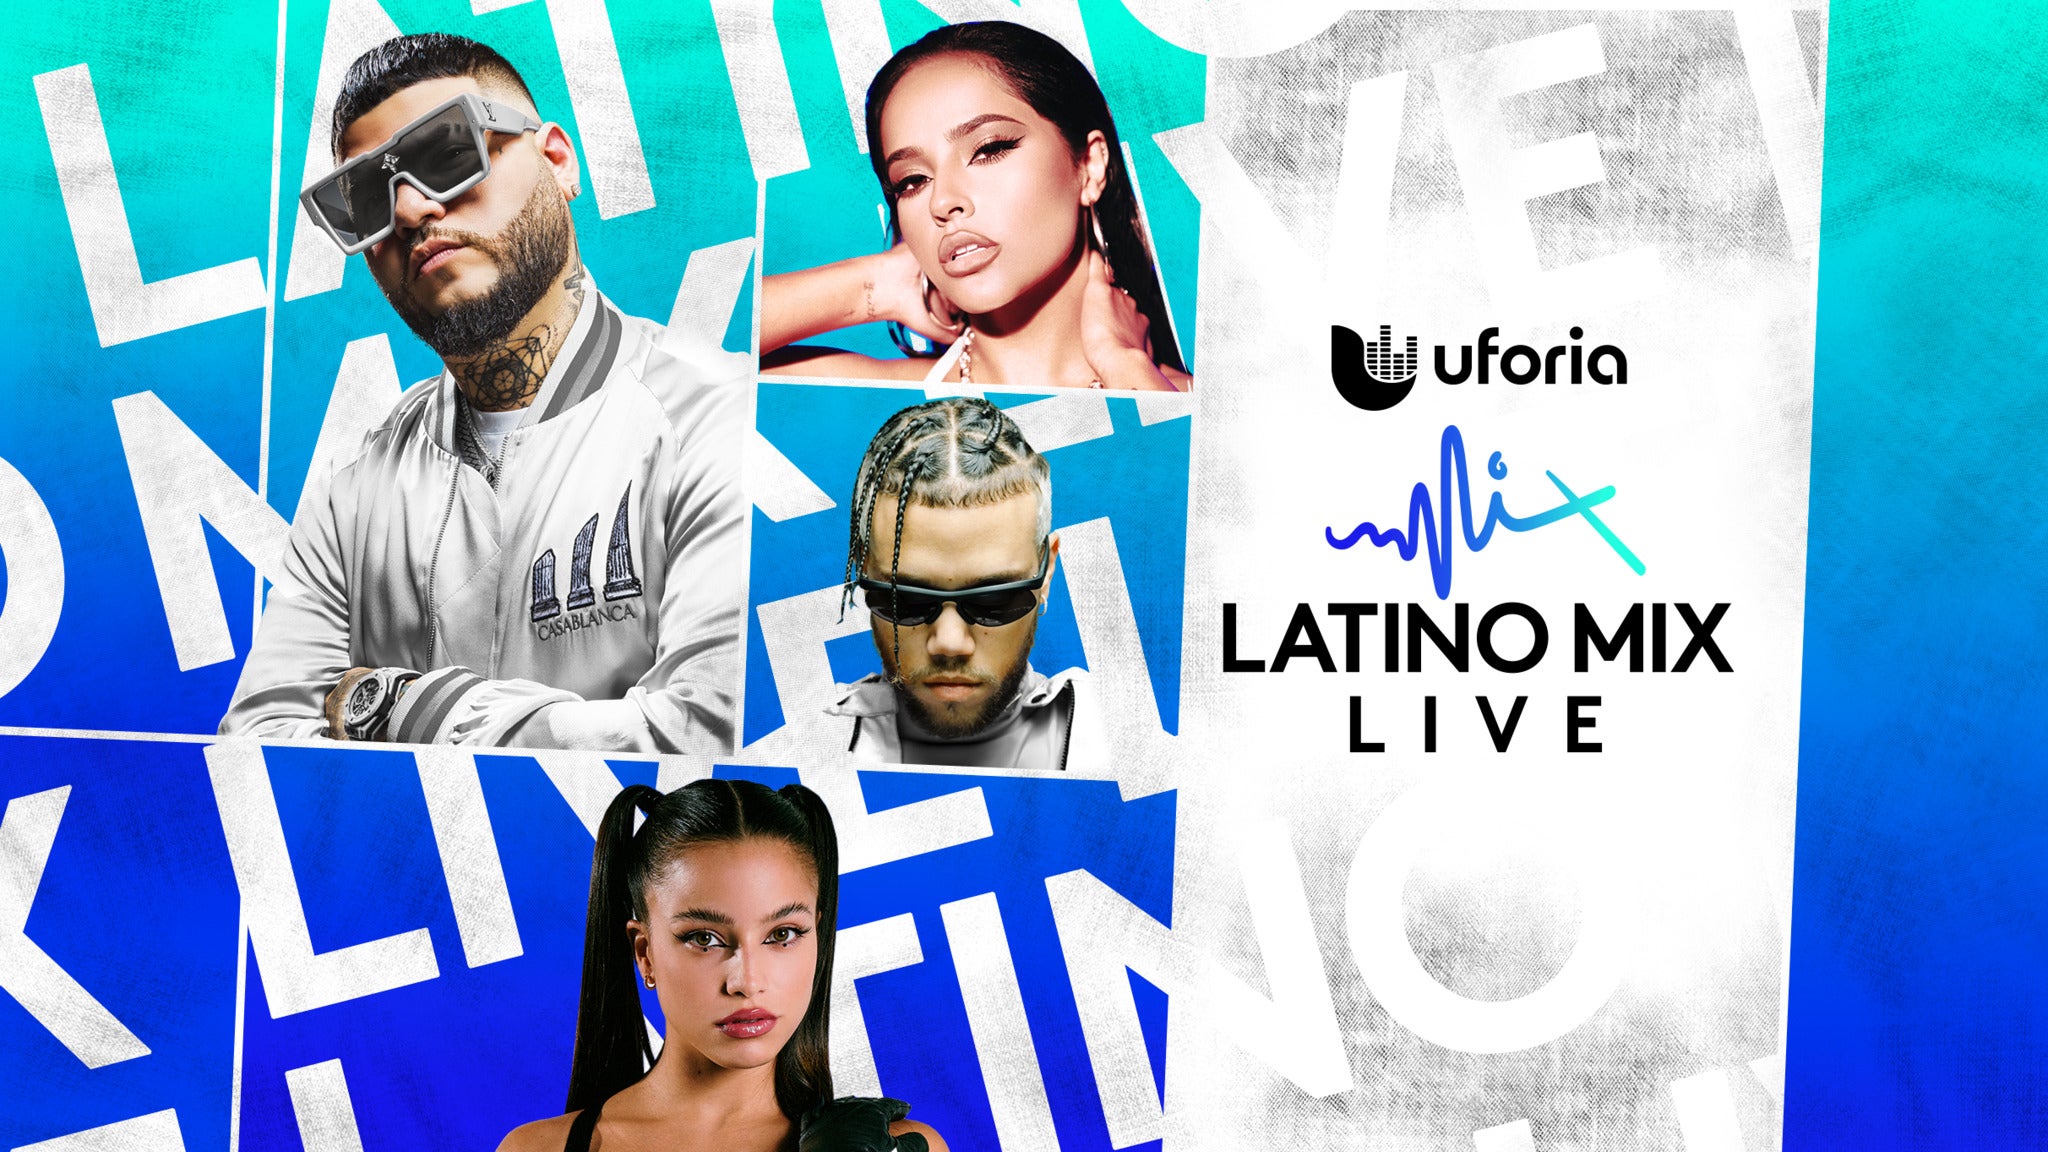 Meddele tage ned tro Uforia Latino Mix Live at Footprint Center on Aug 27, 2022 tickets |  Eventsfy